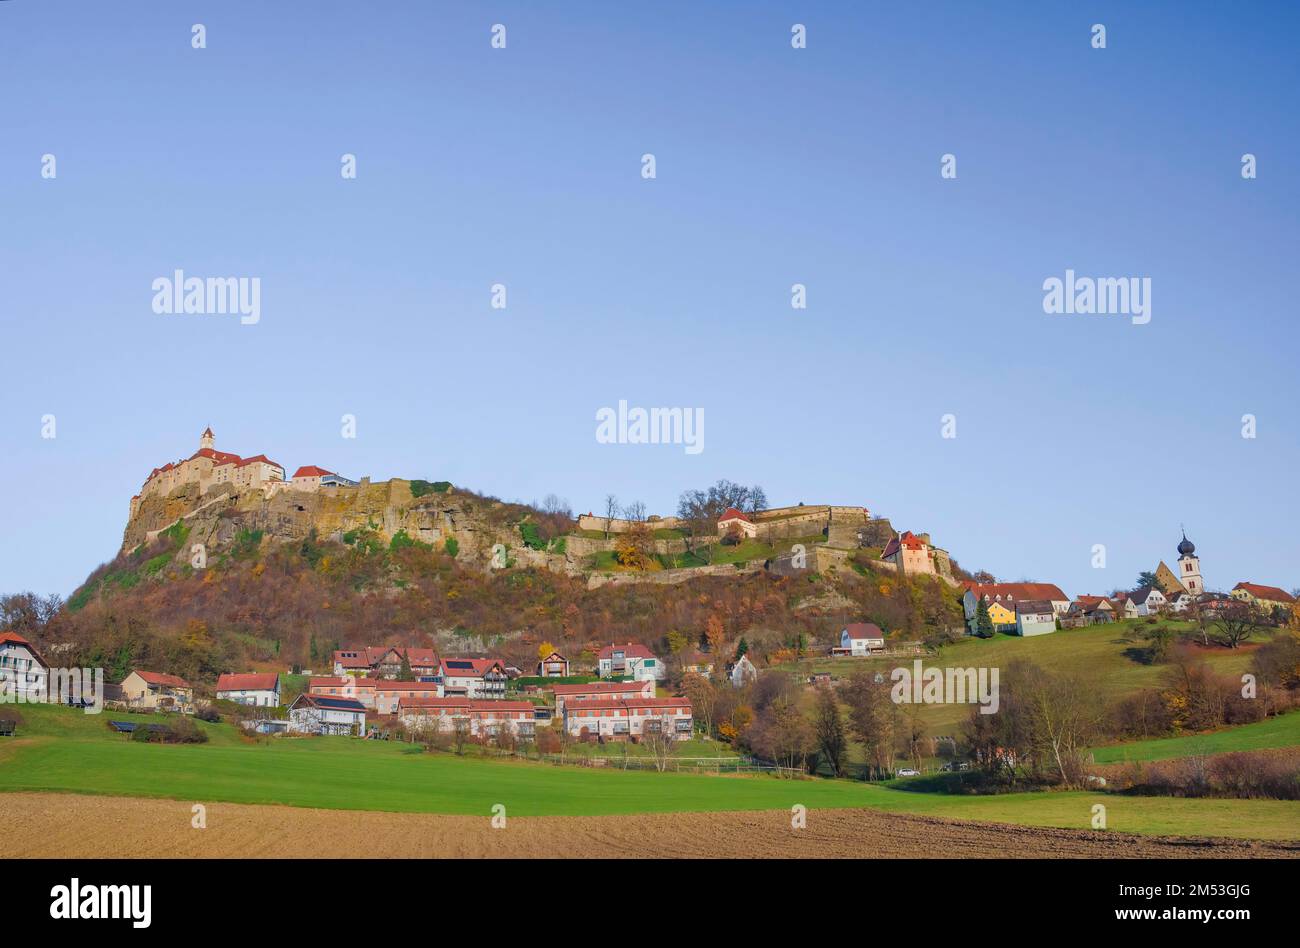 The medieval Riegersburg Castle on top of a dormant volcano, surrounded by charming little village and beautiful autumn landscape, famous tourist attr Stock Photo